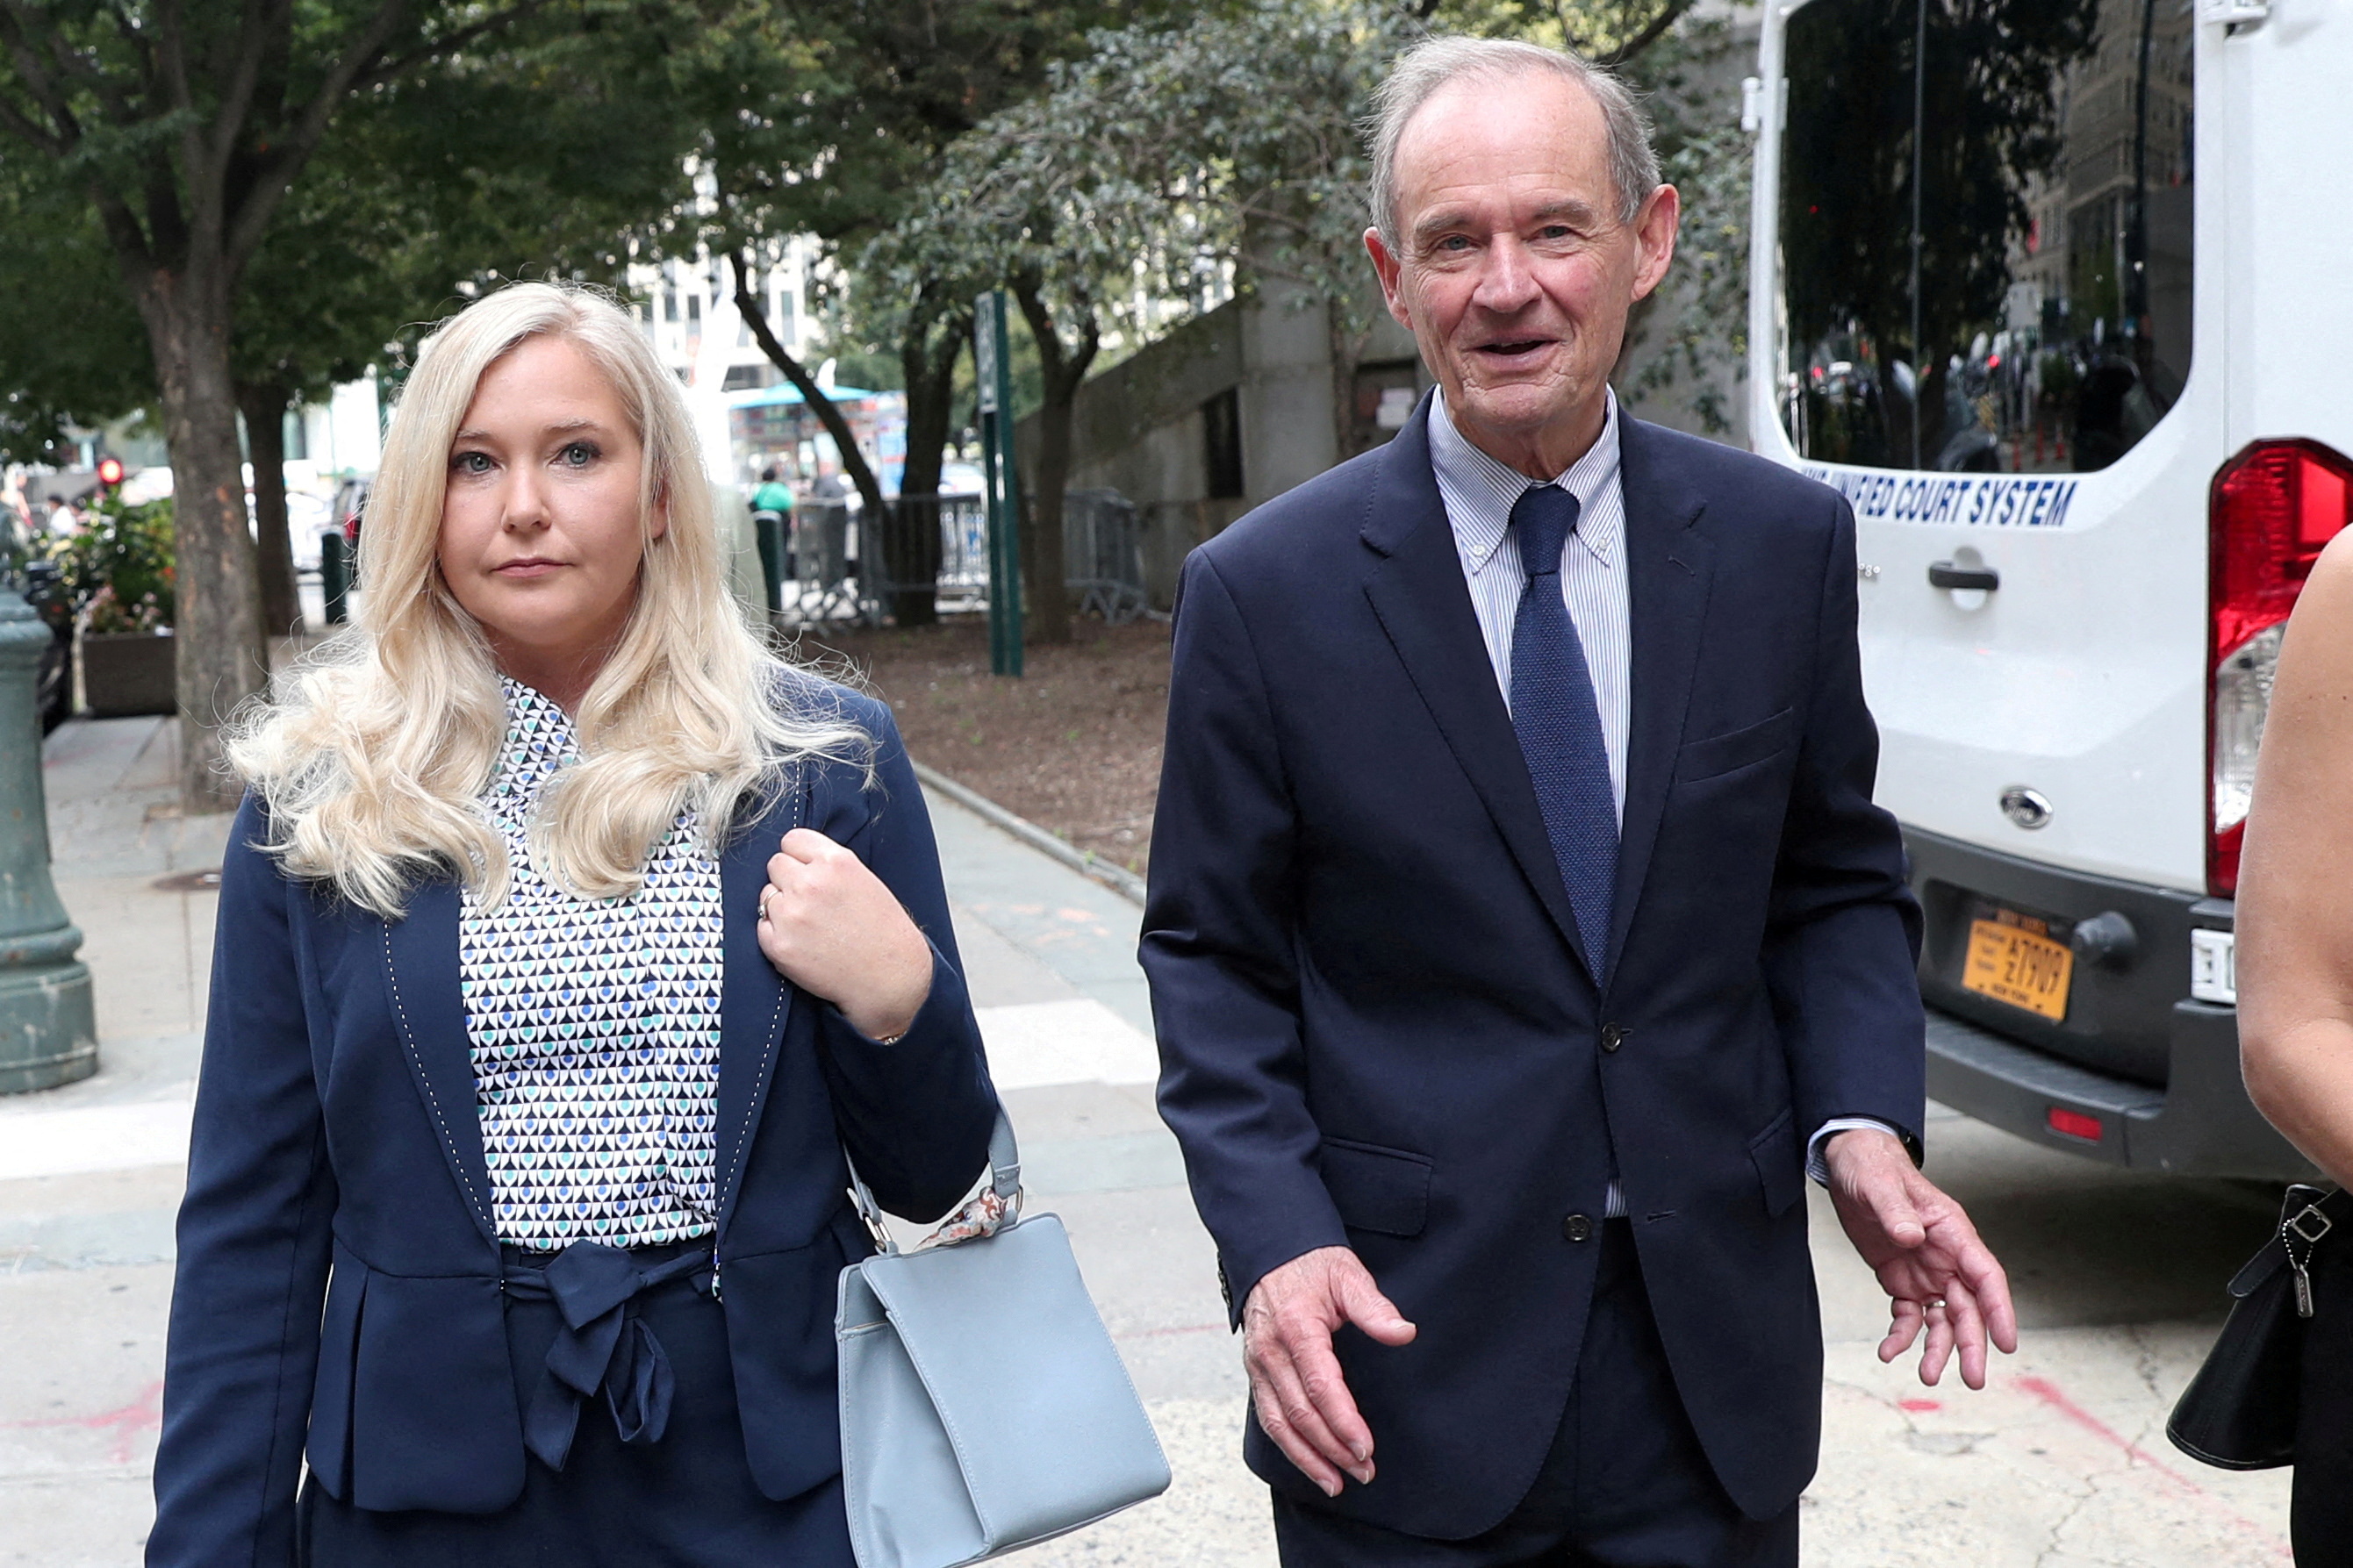 Lawyer David Boies arrives with his client Virginia Giuffre for hearing in the criminal case against Jeffrey Epstein, who died this month in what a New York City medical examiner ruled a suicide, at Federal Court in New York